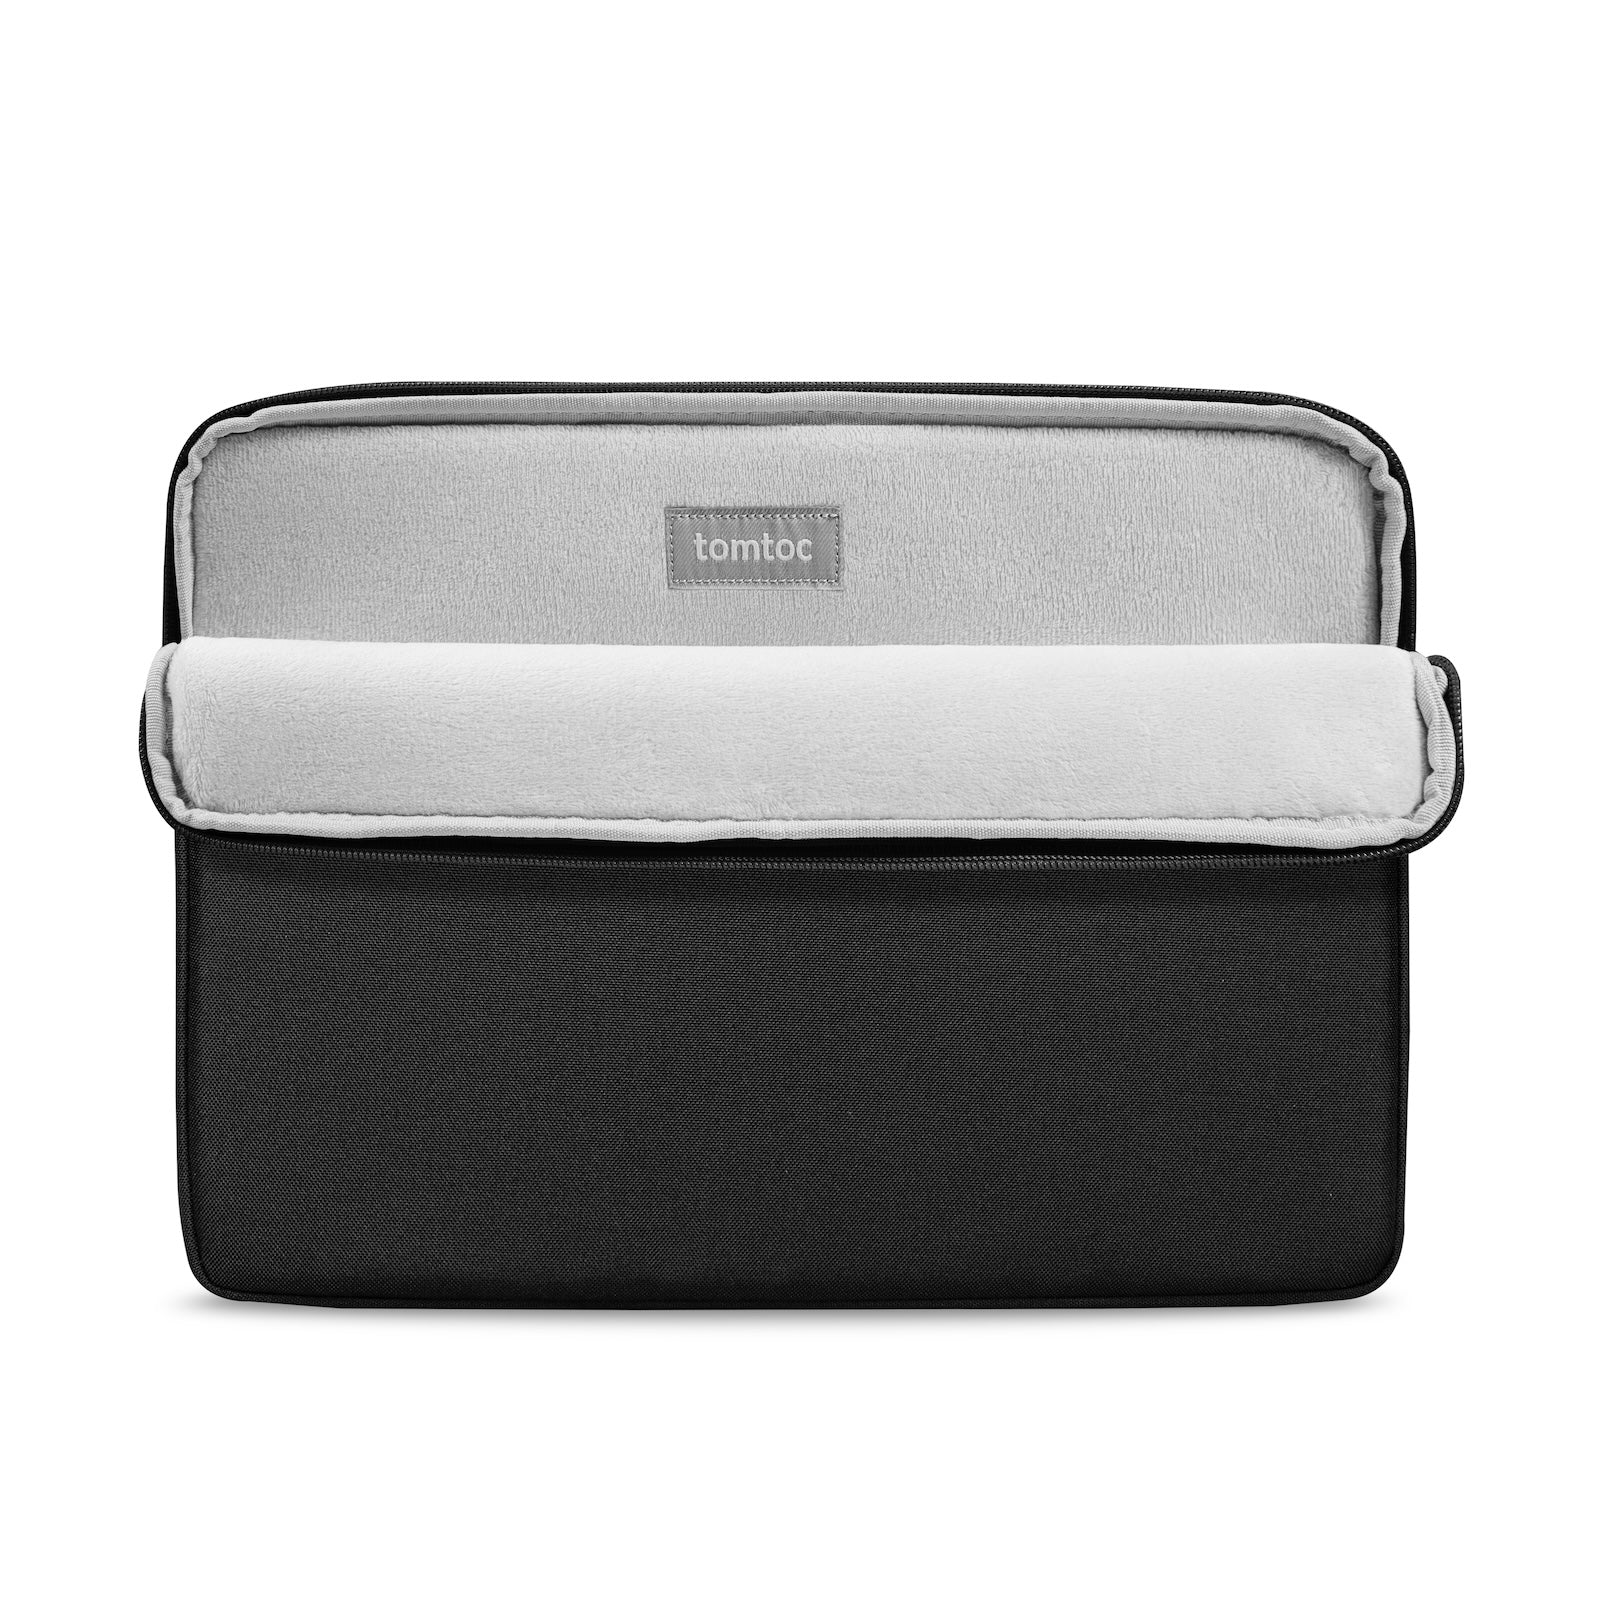 tomtoc Light-A18 Laptop Sleeve - 14inch